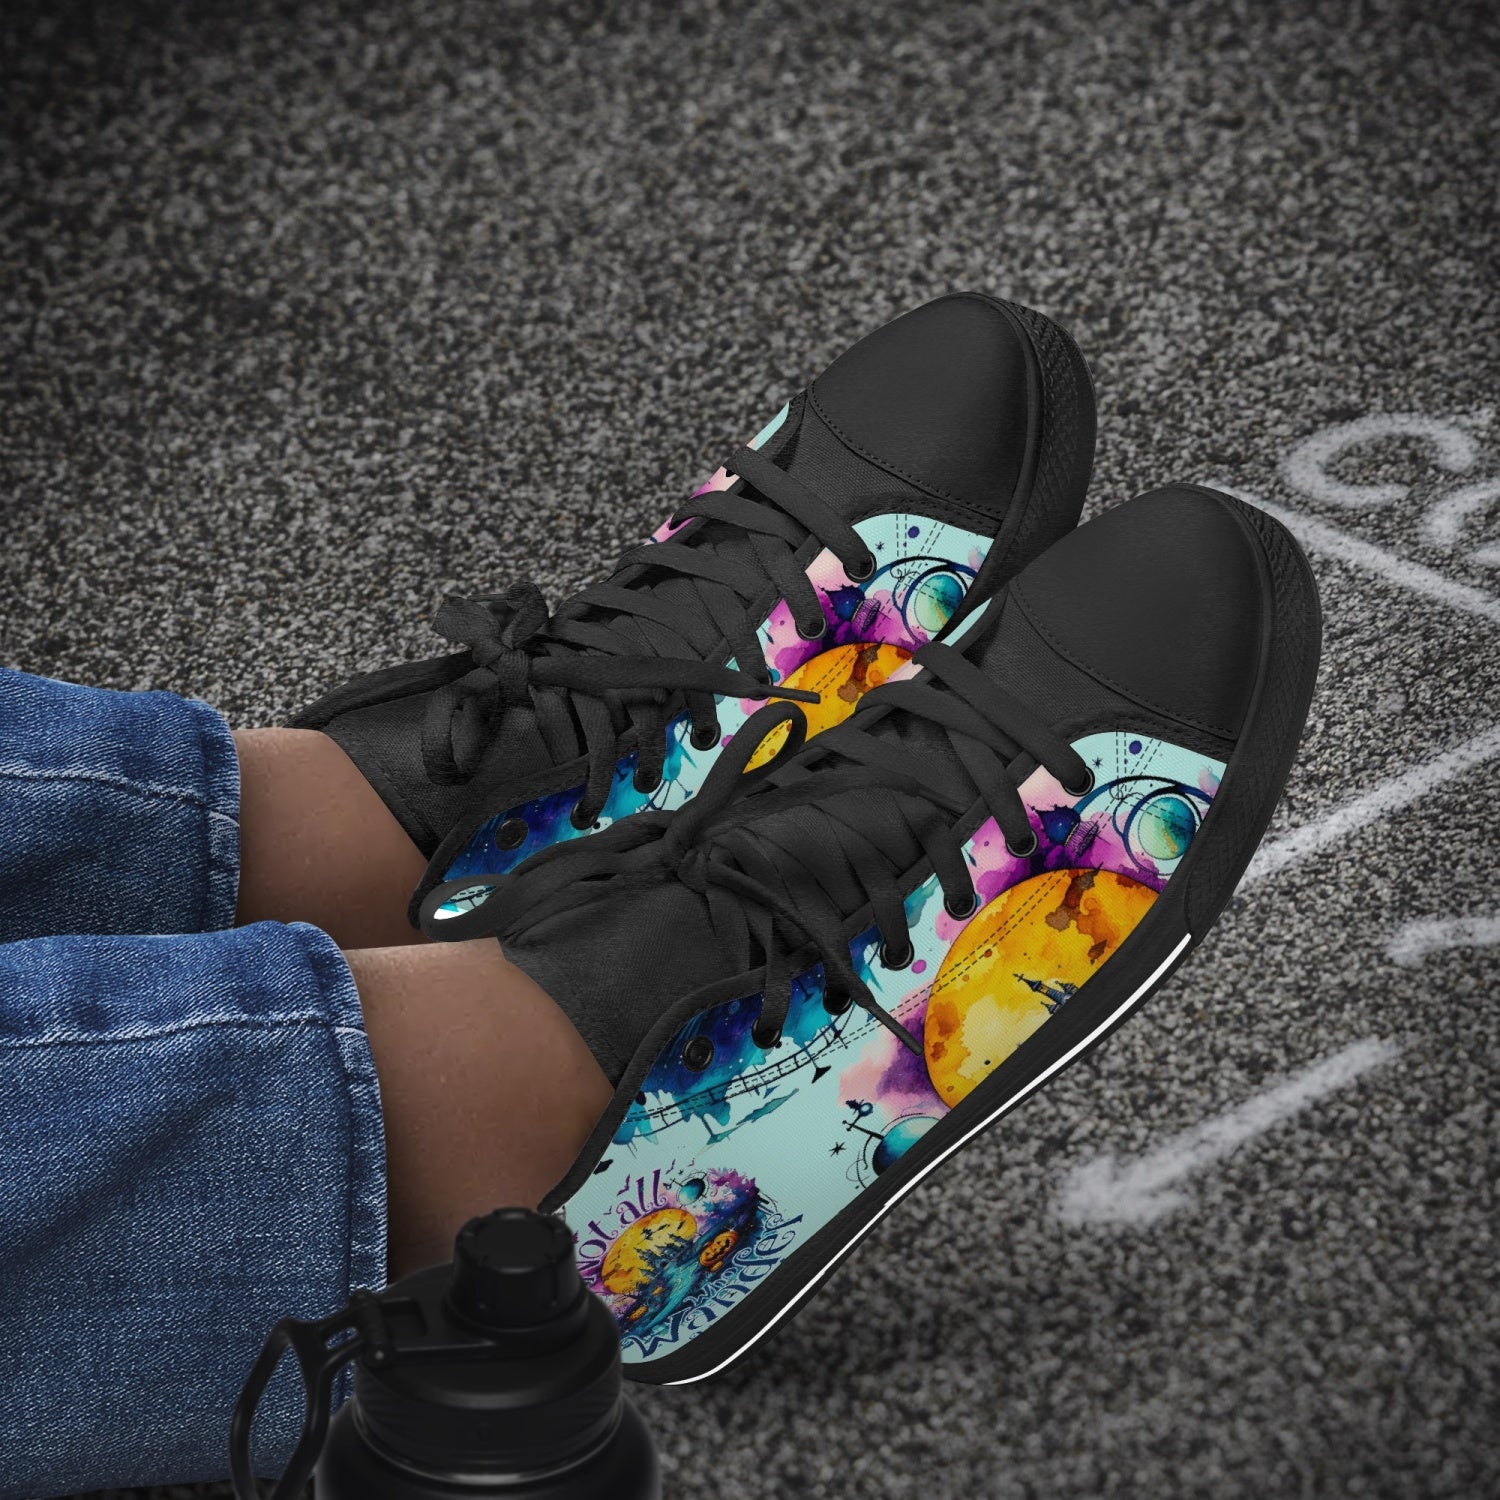 NOT ALL WHO WANDER ARE LOST HALLOWEEN HIGH TOP CANVAS SHOES - TY1008236